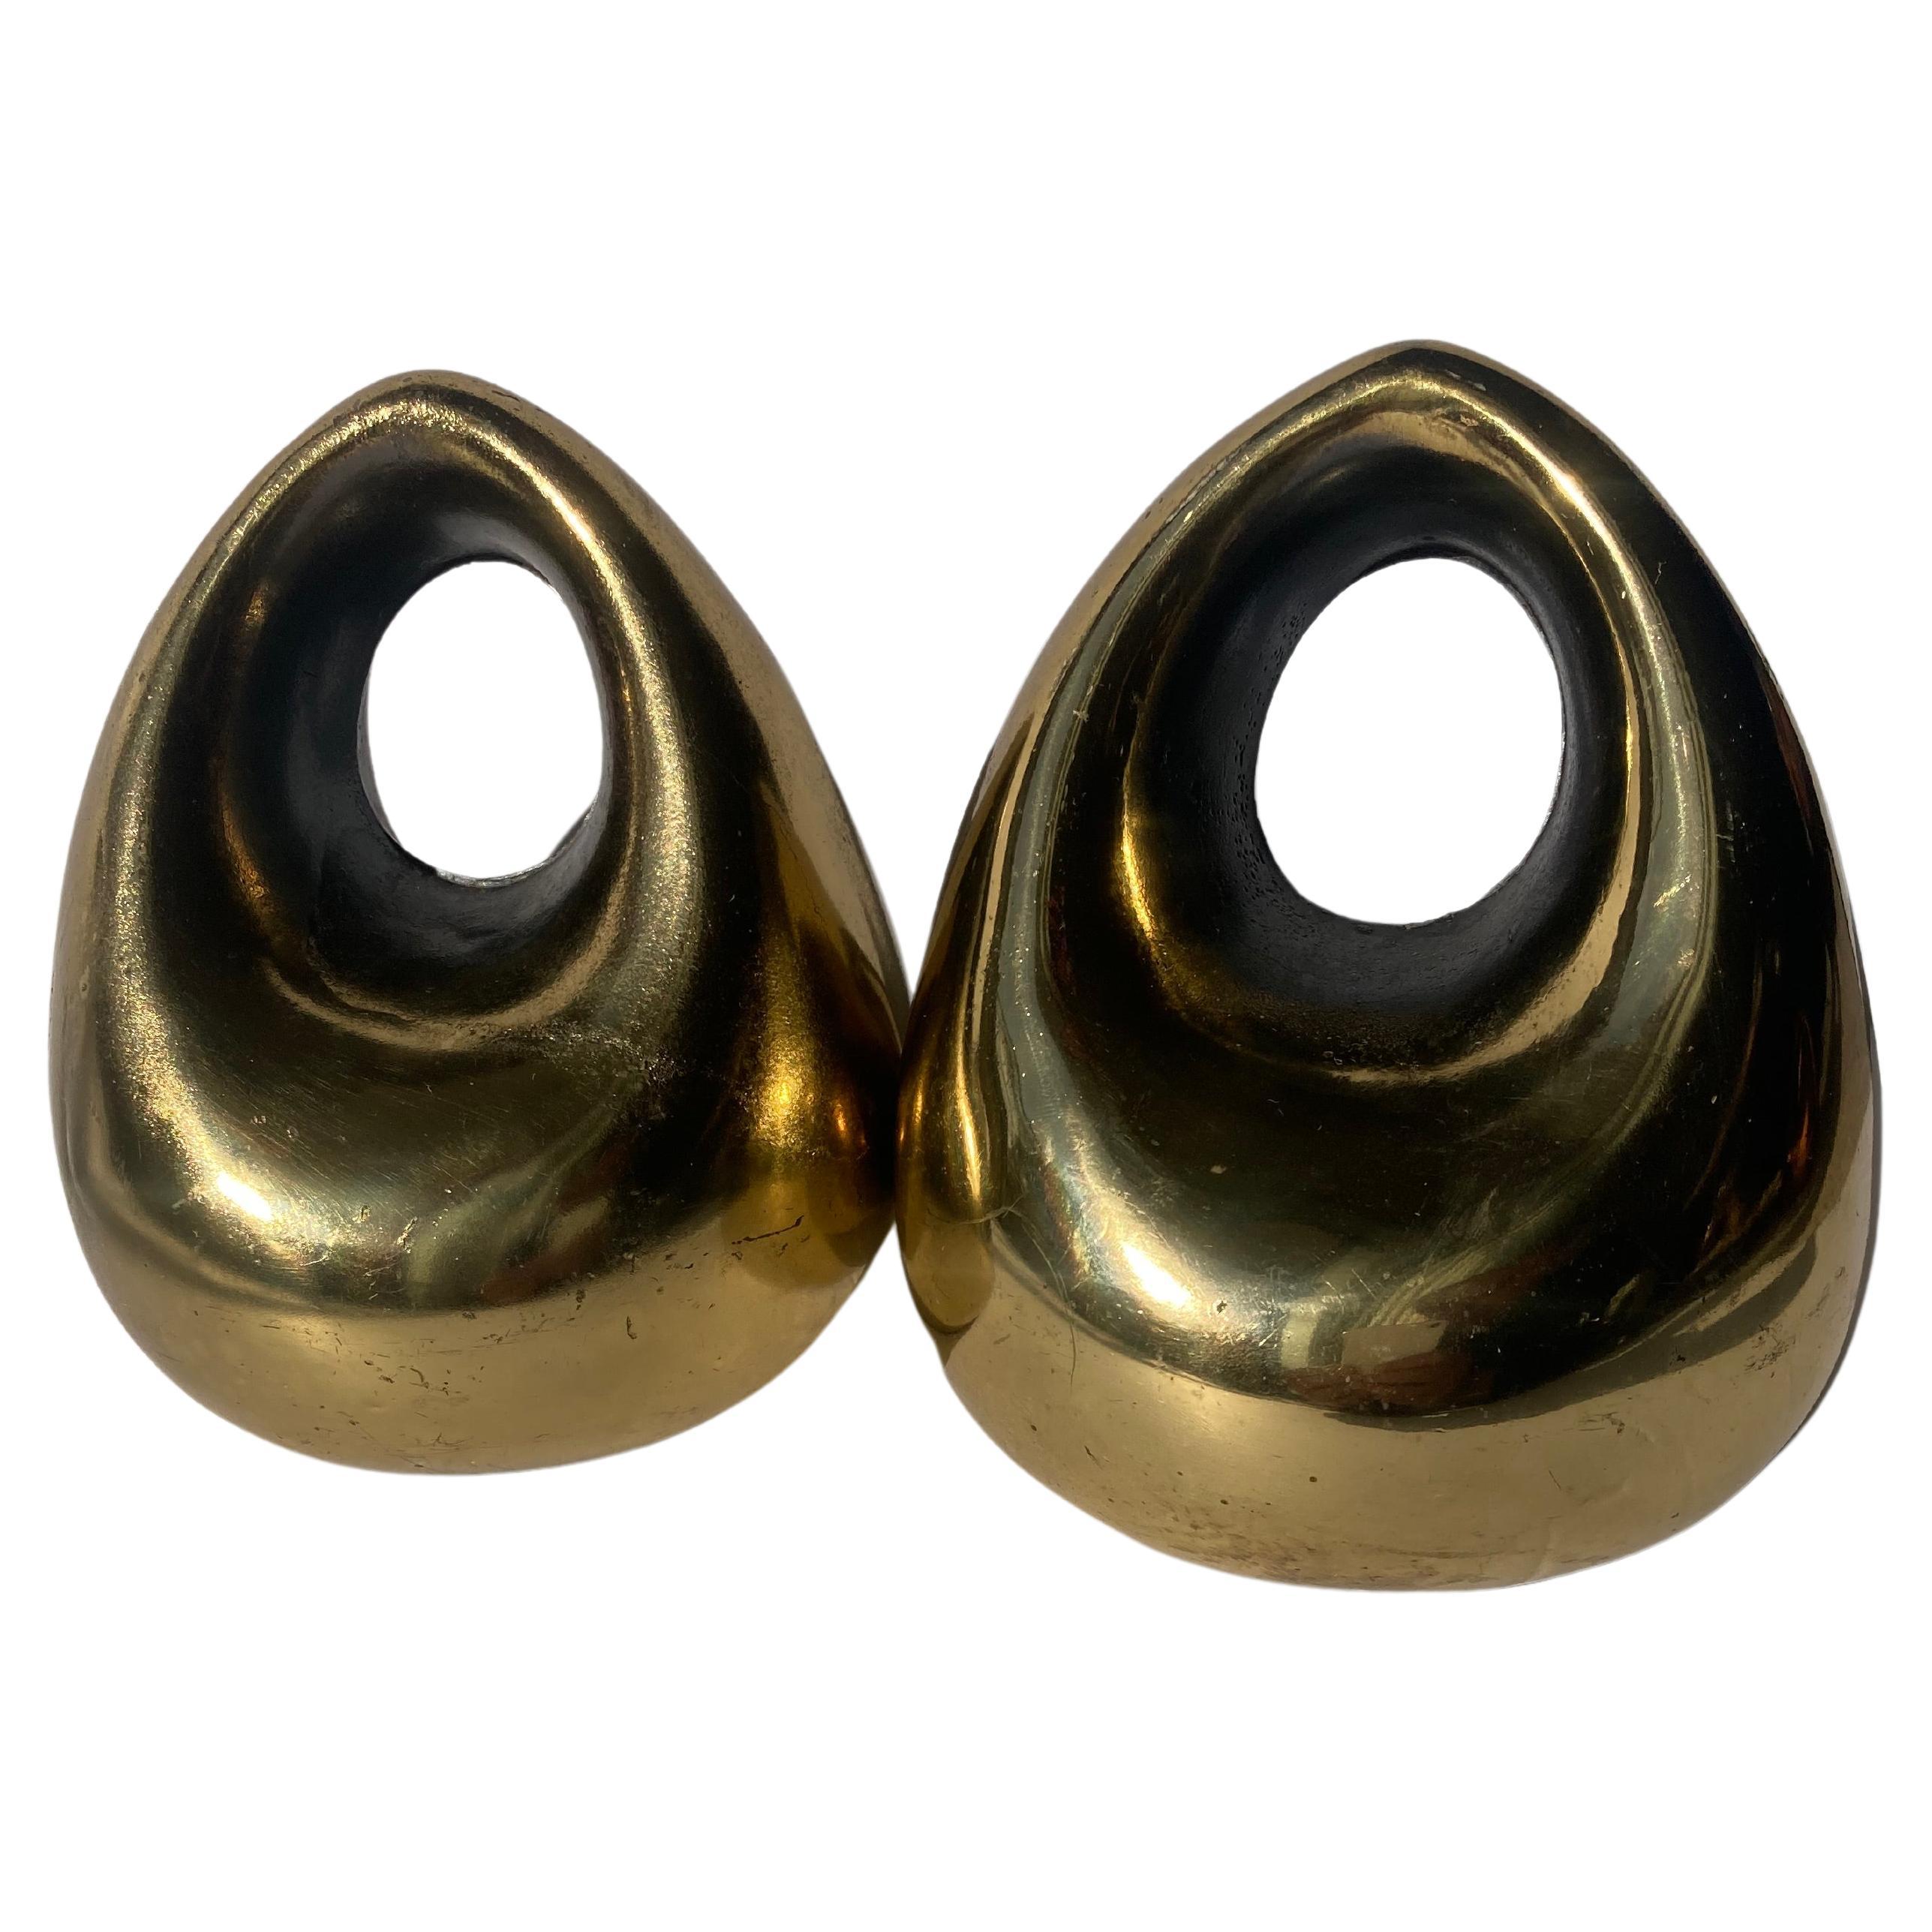 Ben Seibel for Jenfred-Ware Bookends in Brass Finish